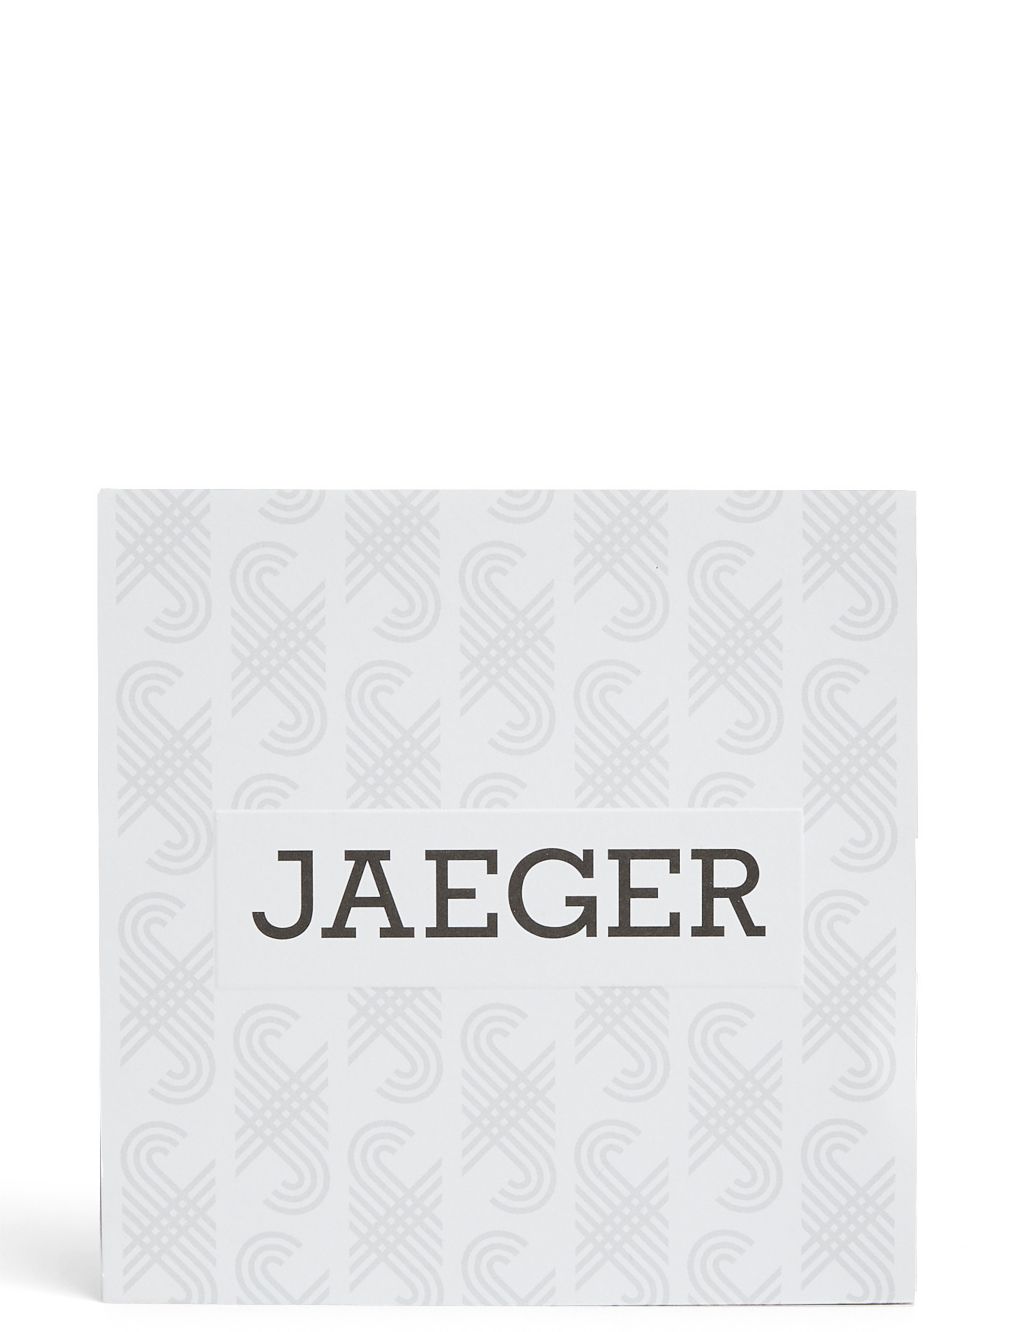 Jaeger Gift Card in Presentation Box 2 of 5